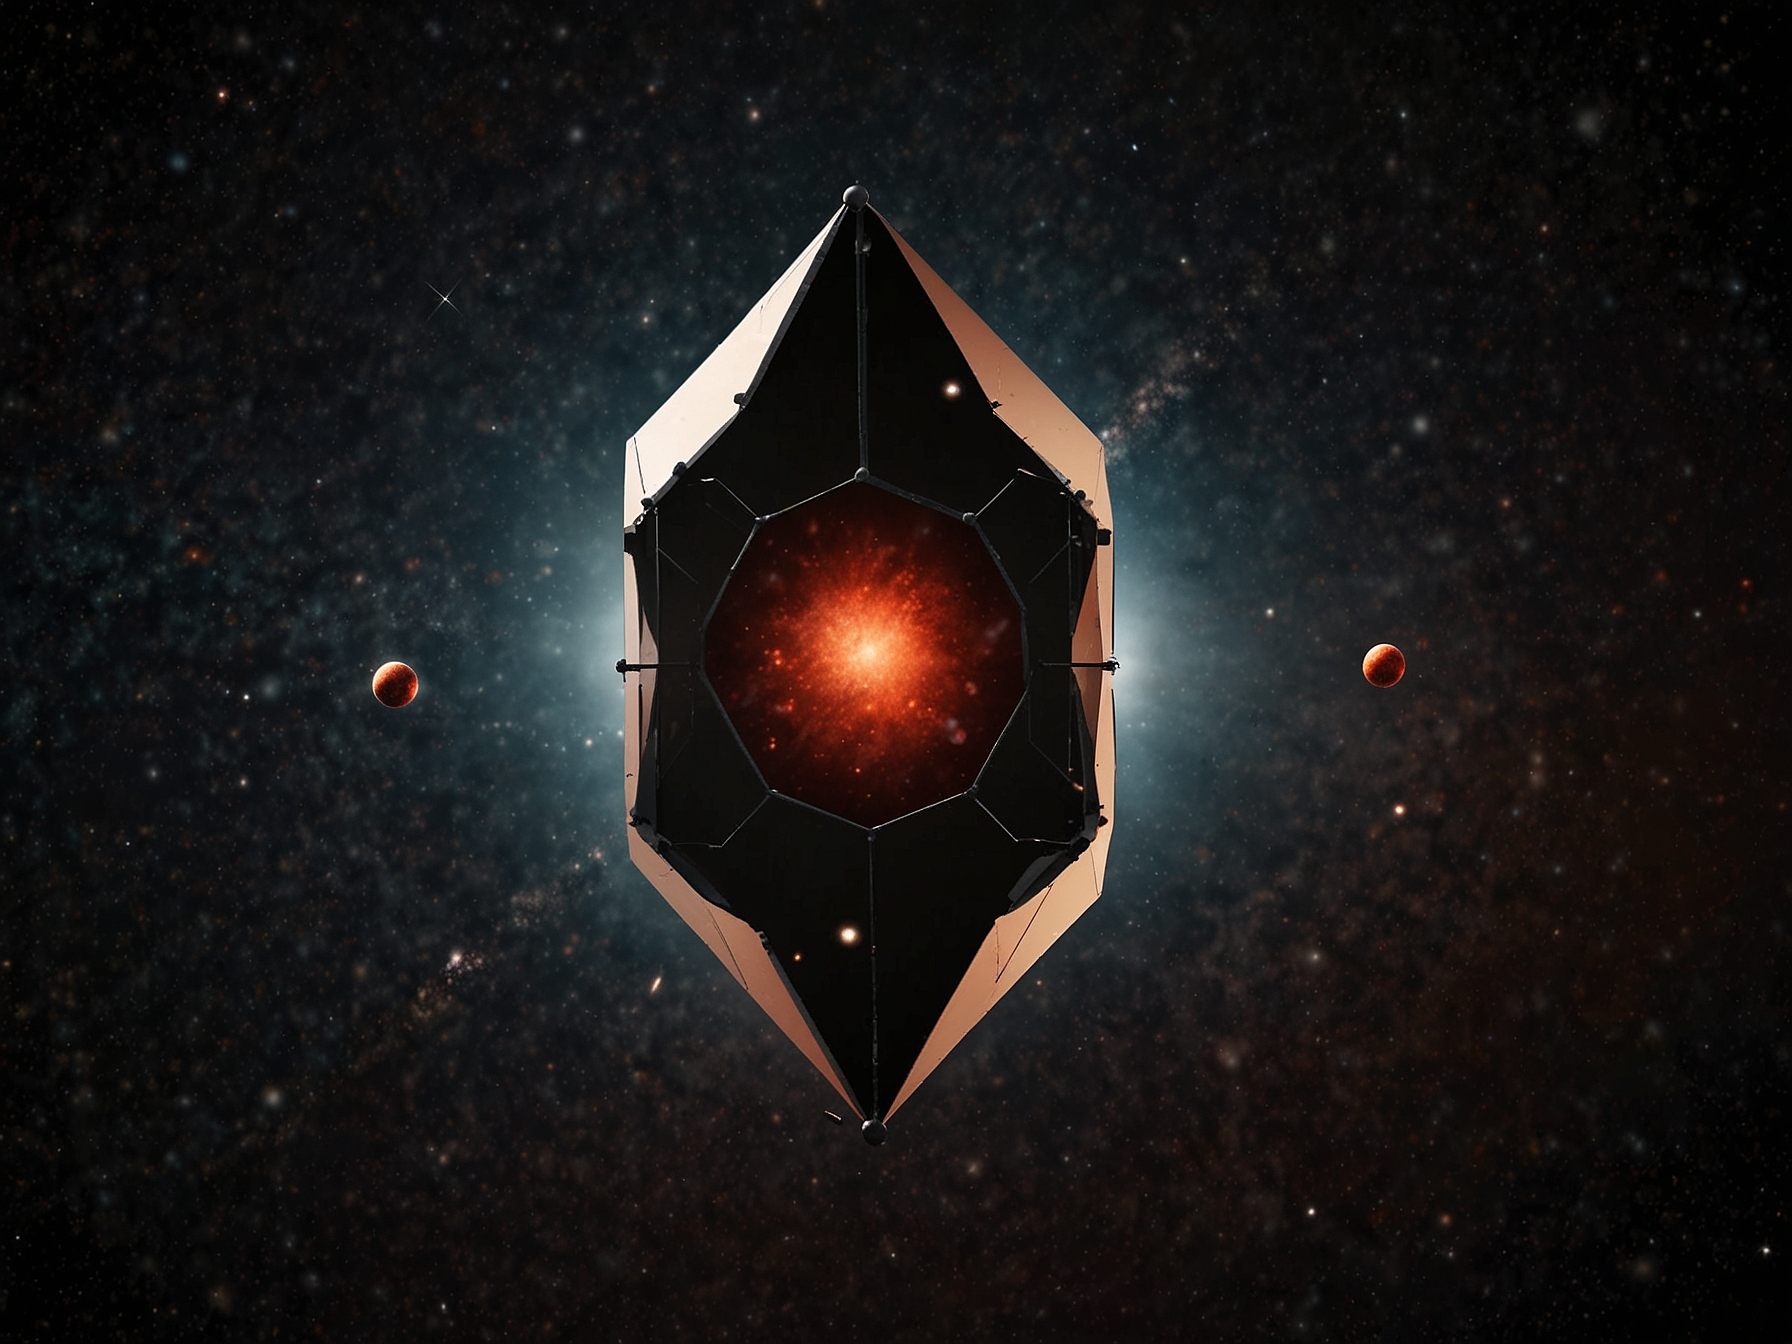 A stunning visualization of the James Webb Space Telescope capturing three red dots at the dawn of the cosmos, symbolizing ancient galaxies discovered. The reddish hue showcases their immense age and distance.